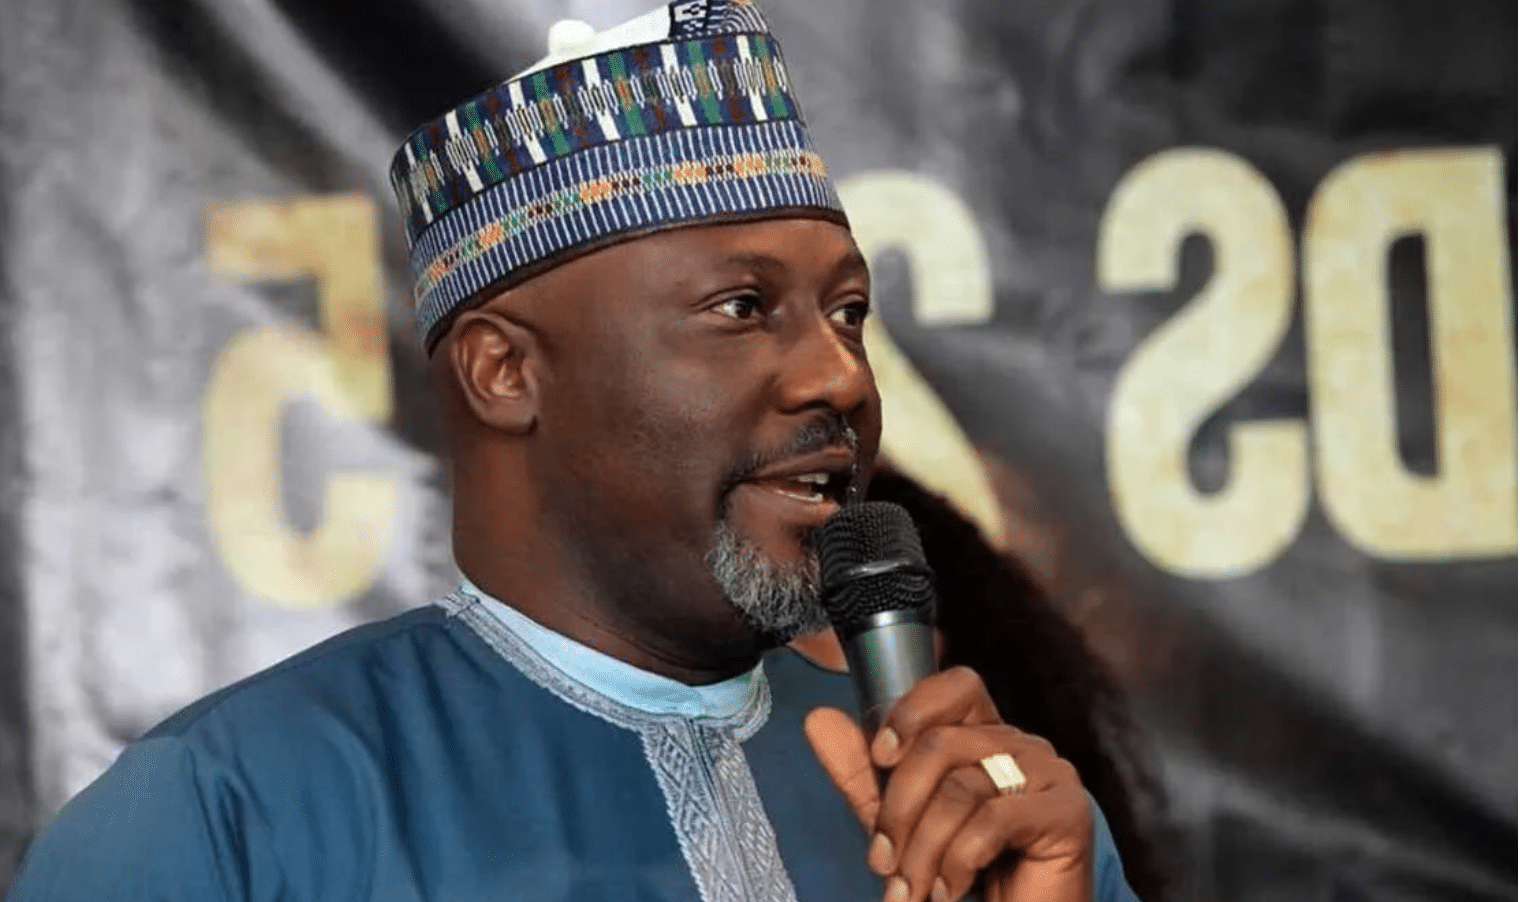 Breaking: Campaign Council Speaks On Dino Melaye Withdrawing From Kogi Governorship Race